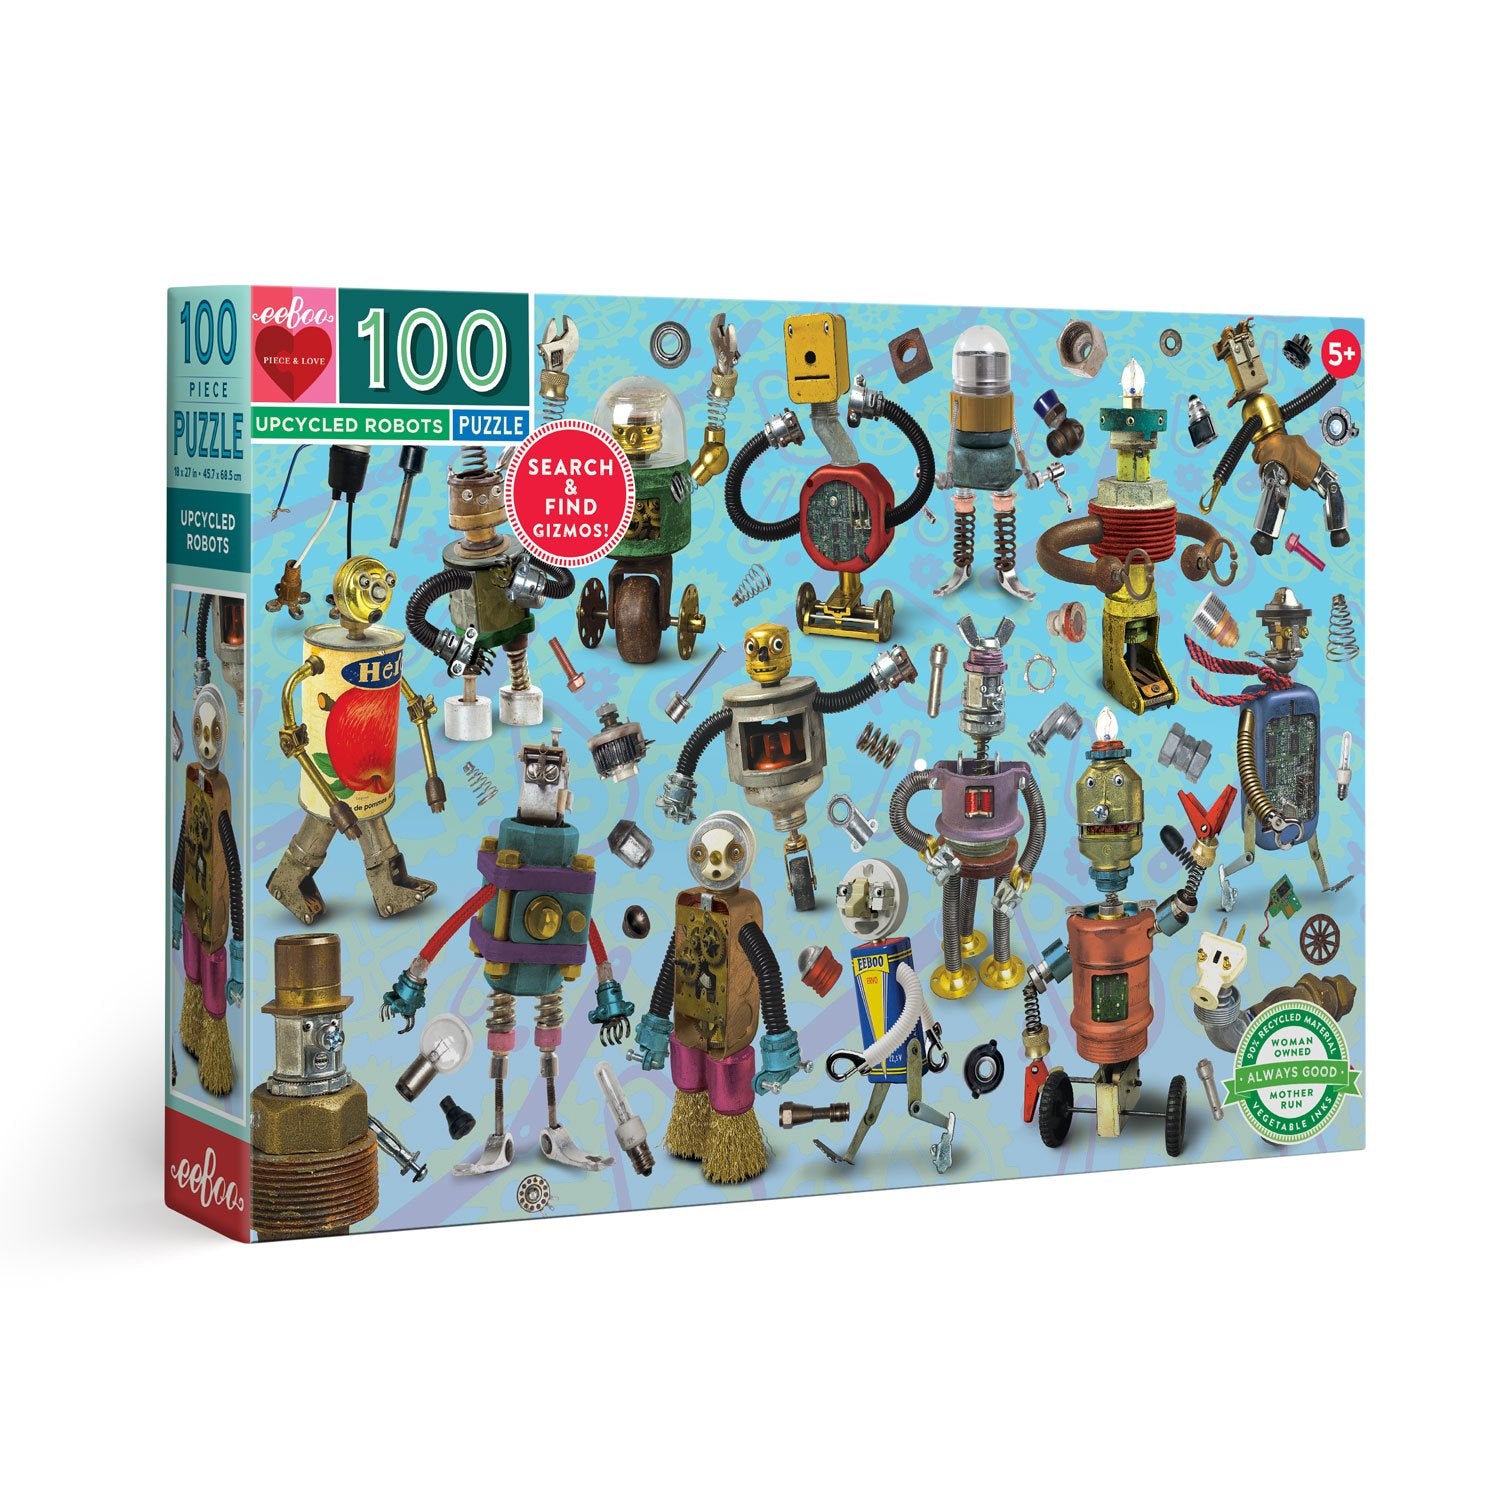 eeBoo 100pc Puzzle Upcycled Robots The Toy Wagon